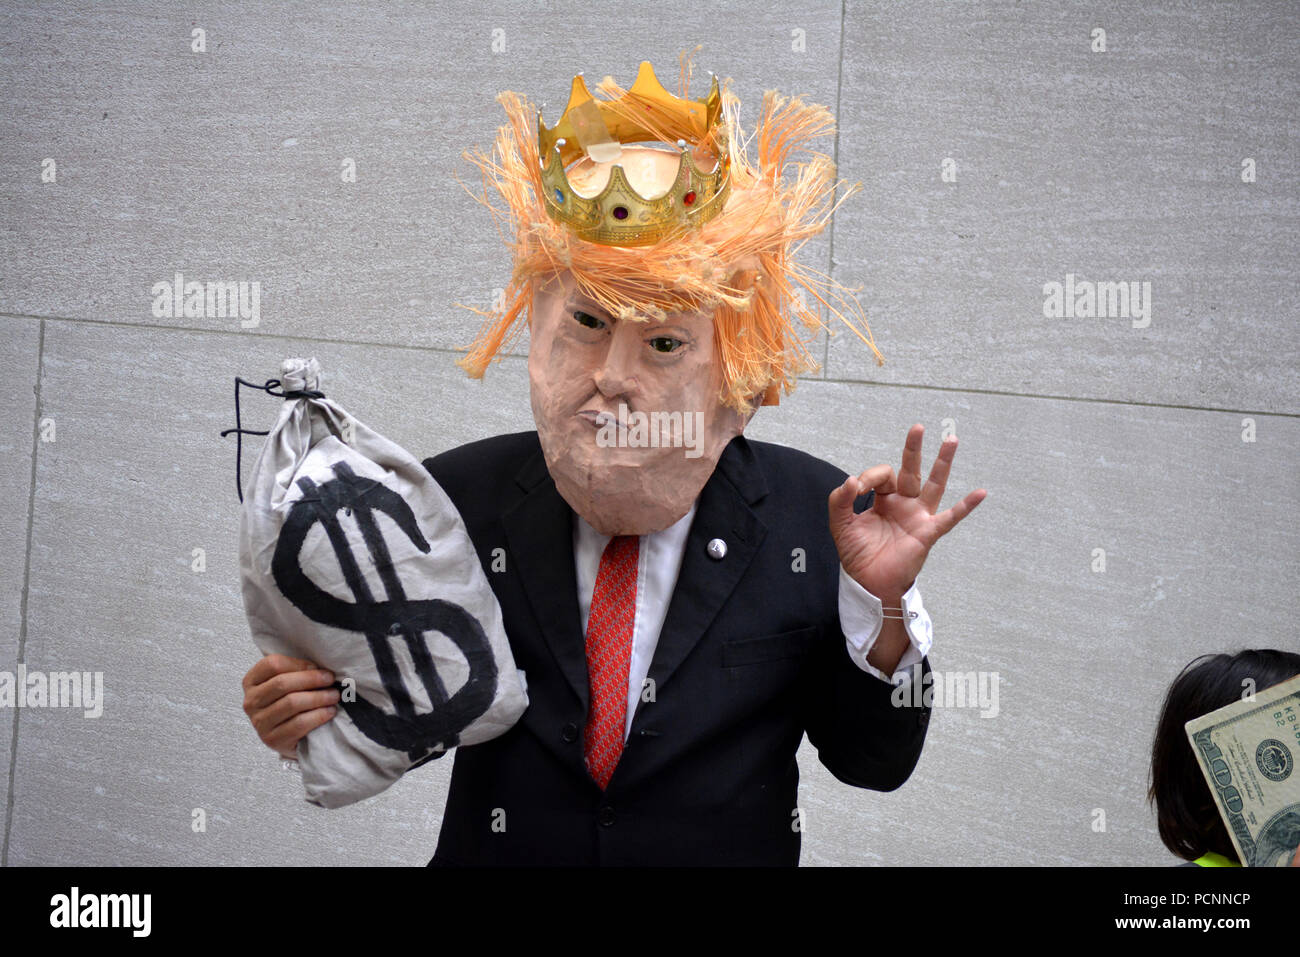 Man dressed as Donald Trump at protest against ICE on Wall Street in Lower Manhattan. Stock Photo